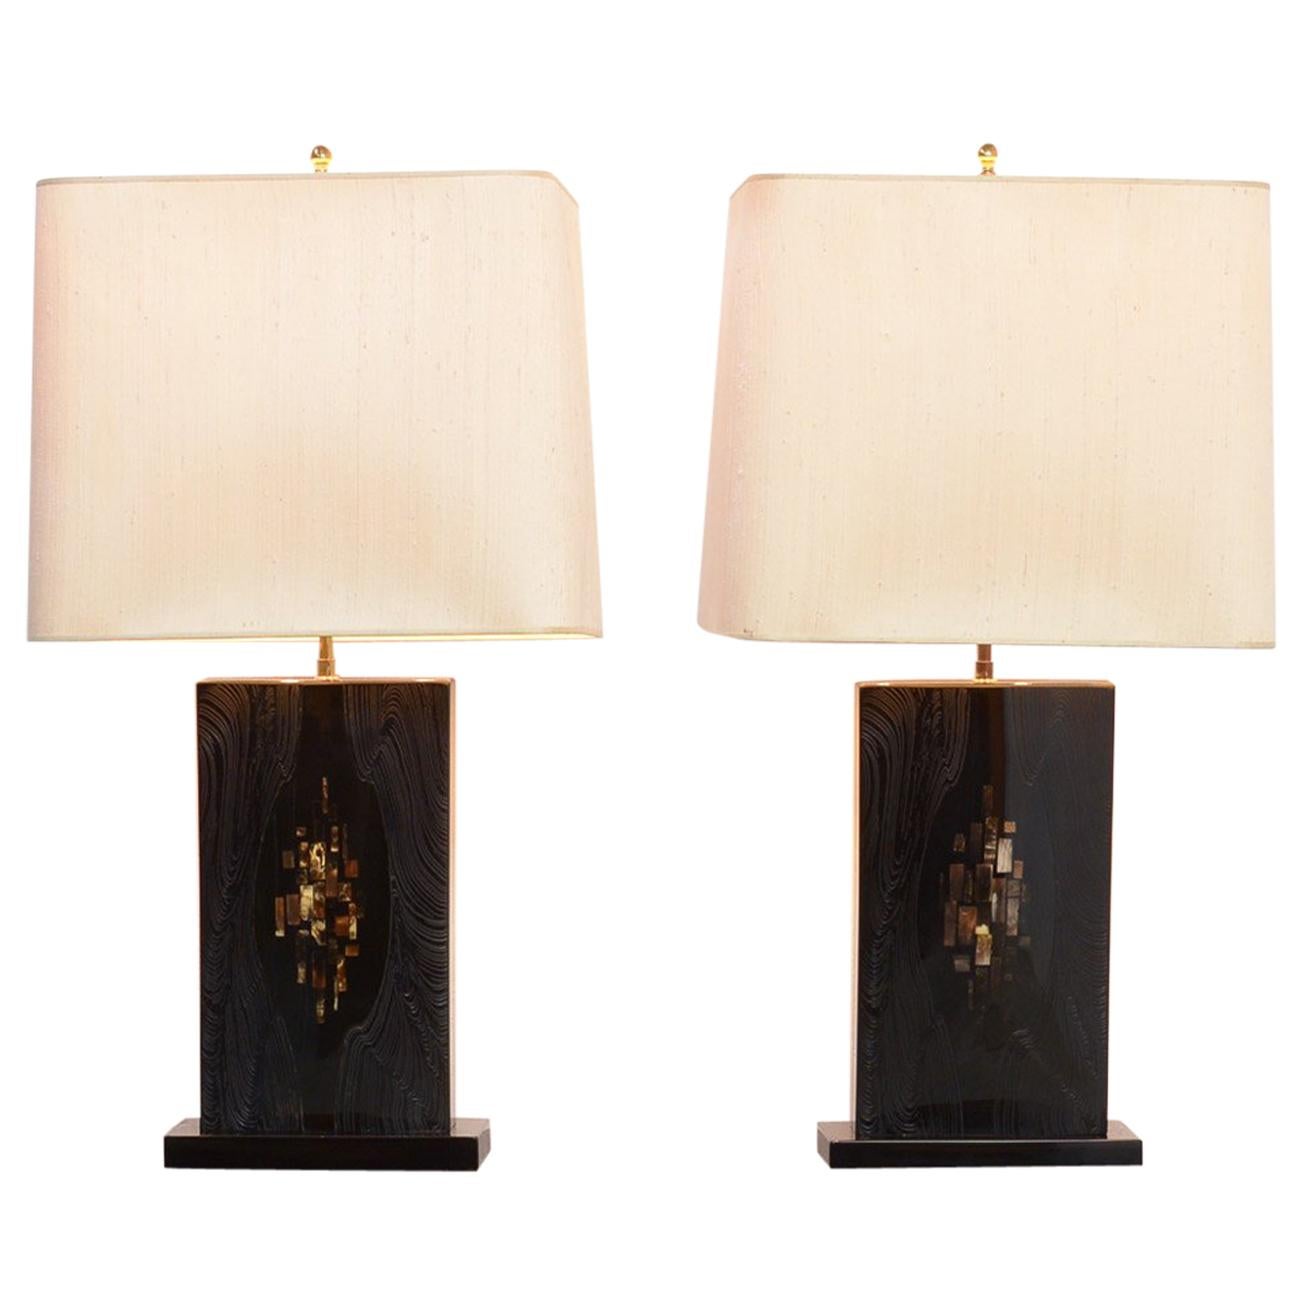 Impressive Pair of Black Lacquered Table Lamps by Jean Claude Dresse For Sale